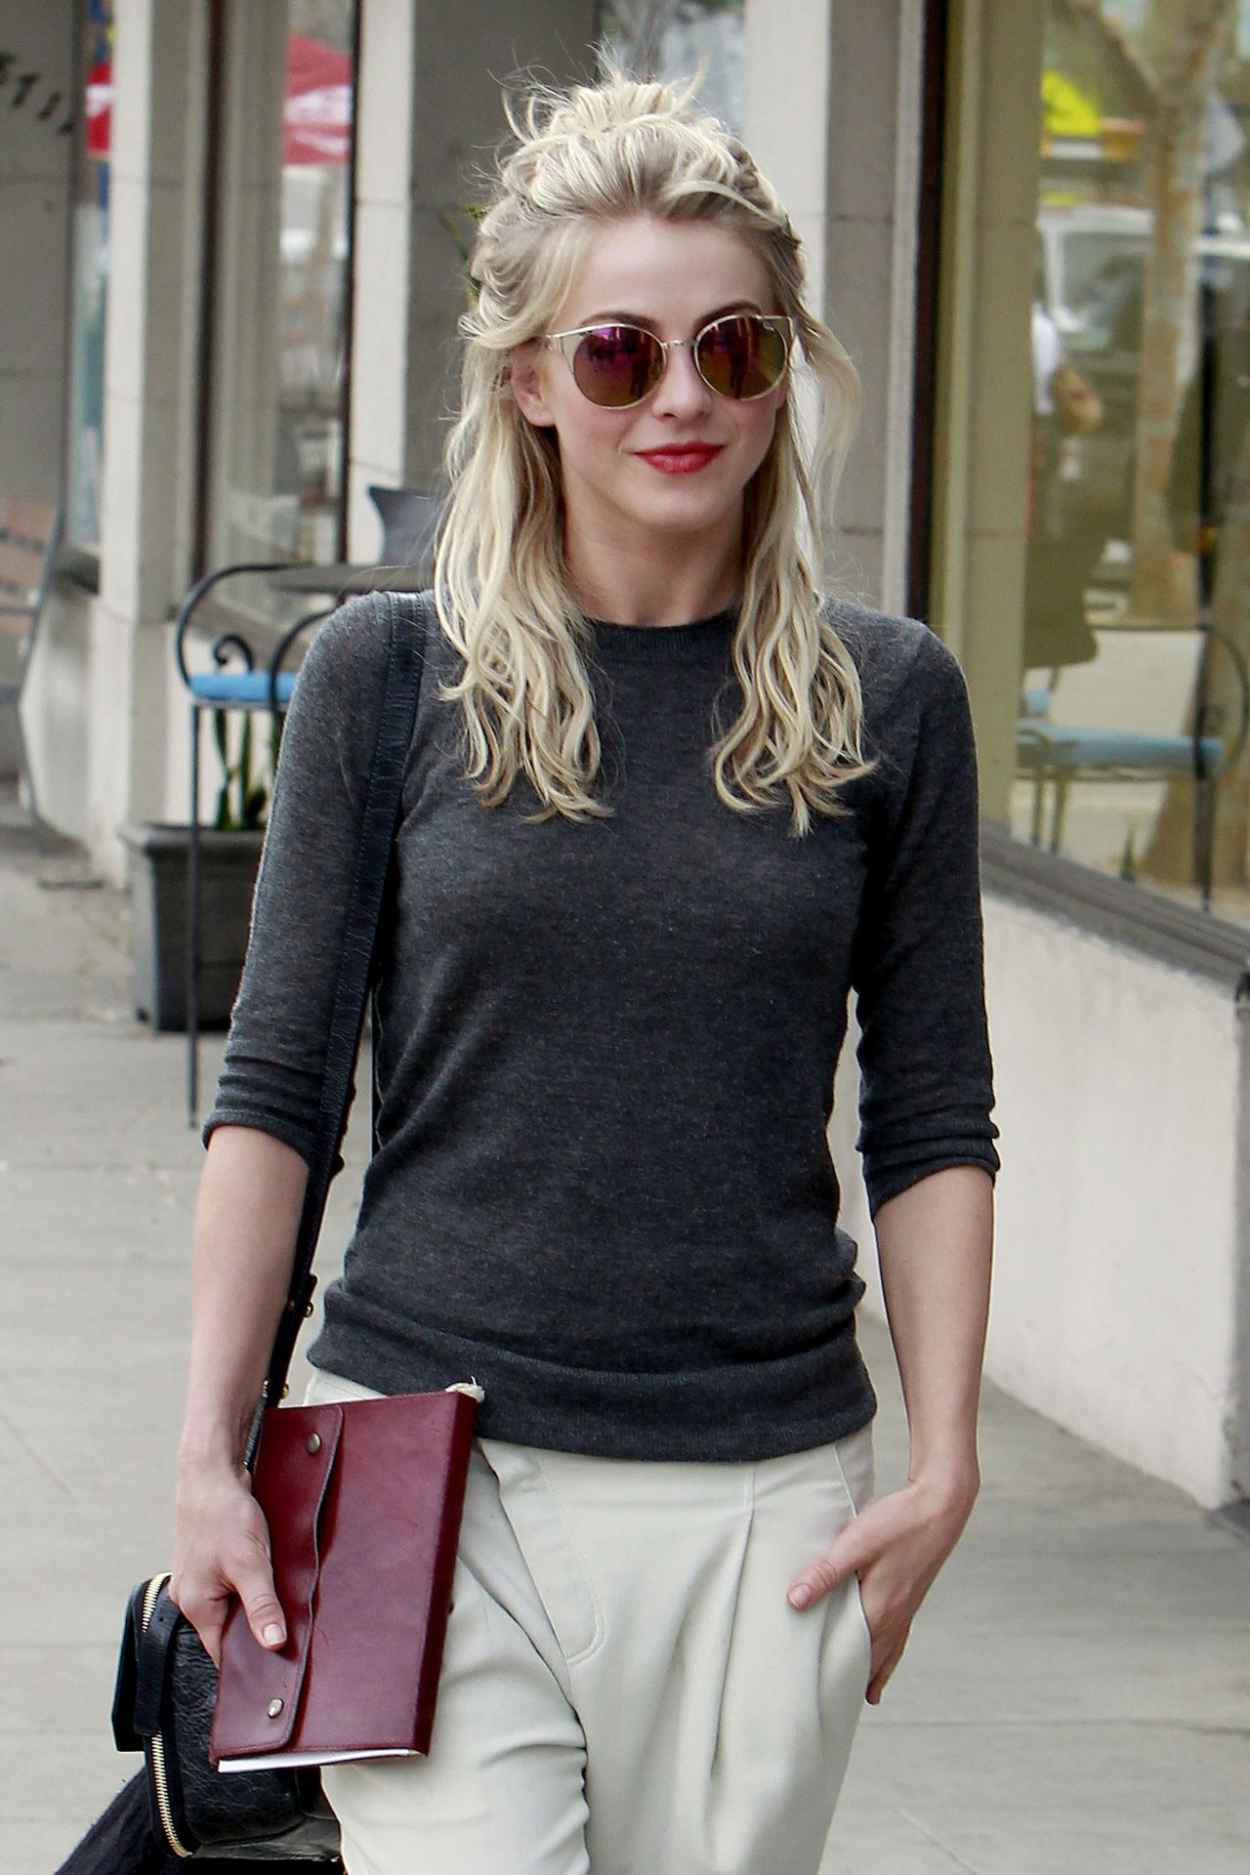 Julianne Hough Street Style - Leaves a Restaurant After Having Lunch With Friends - January 2015-1